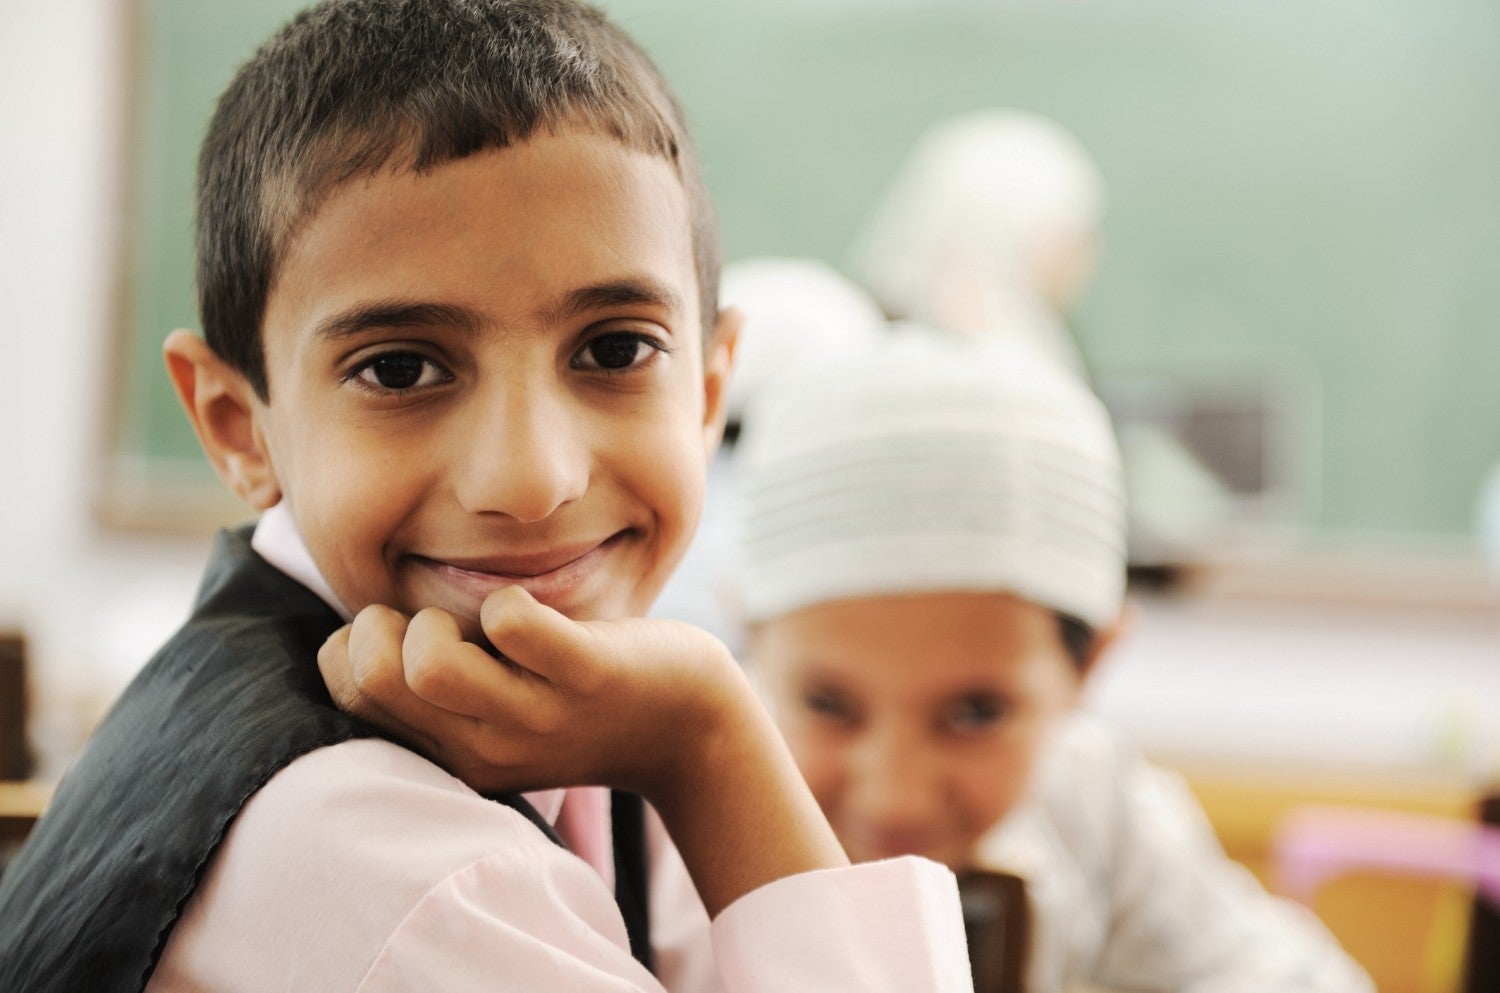 Smiling child in an academic setting